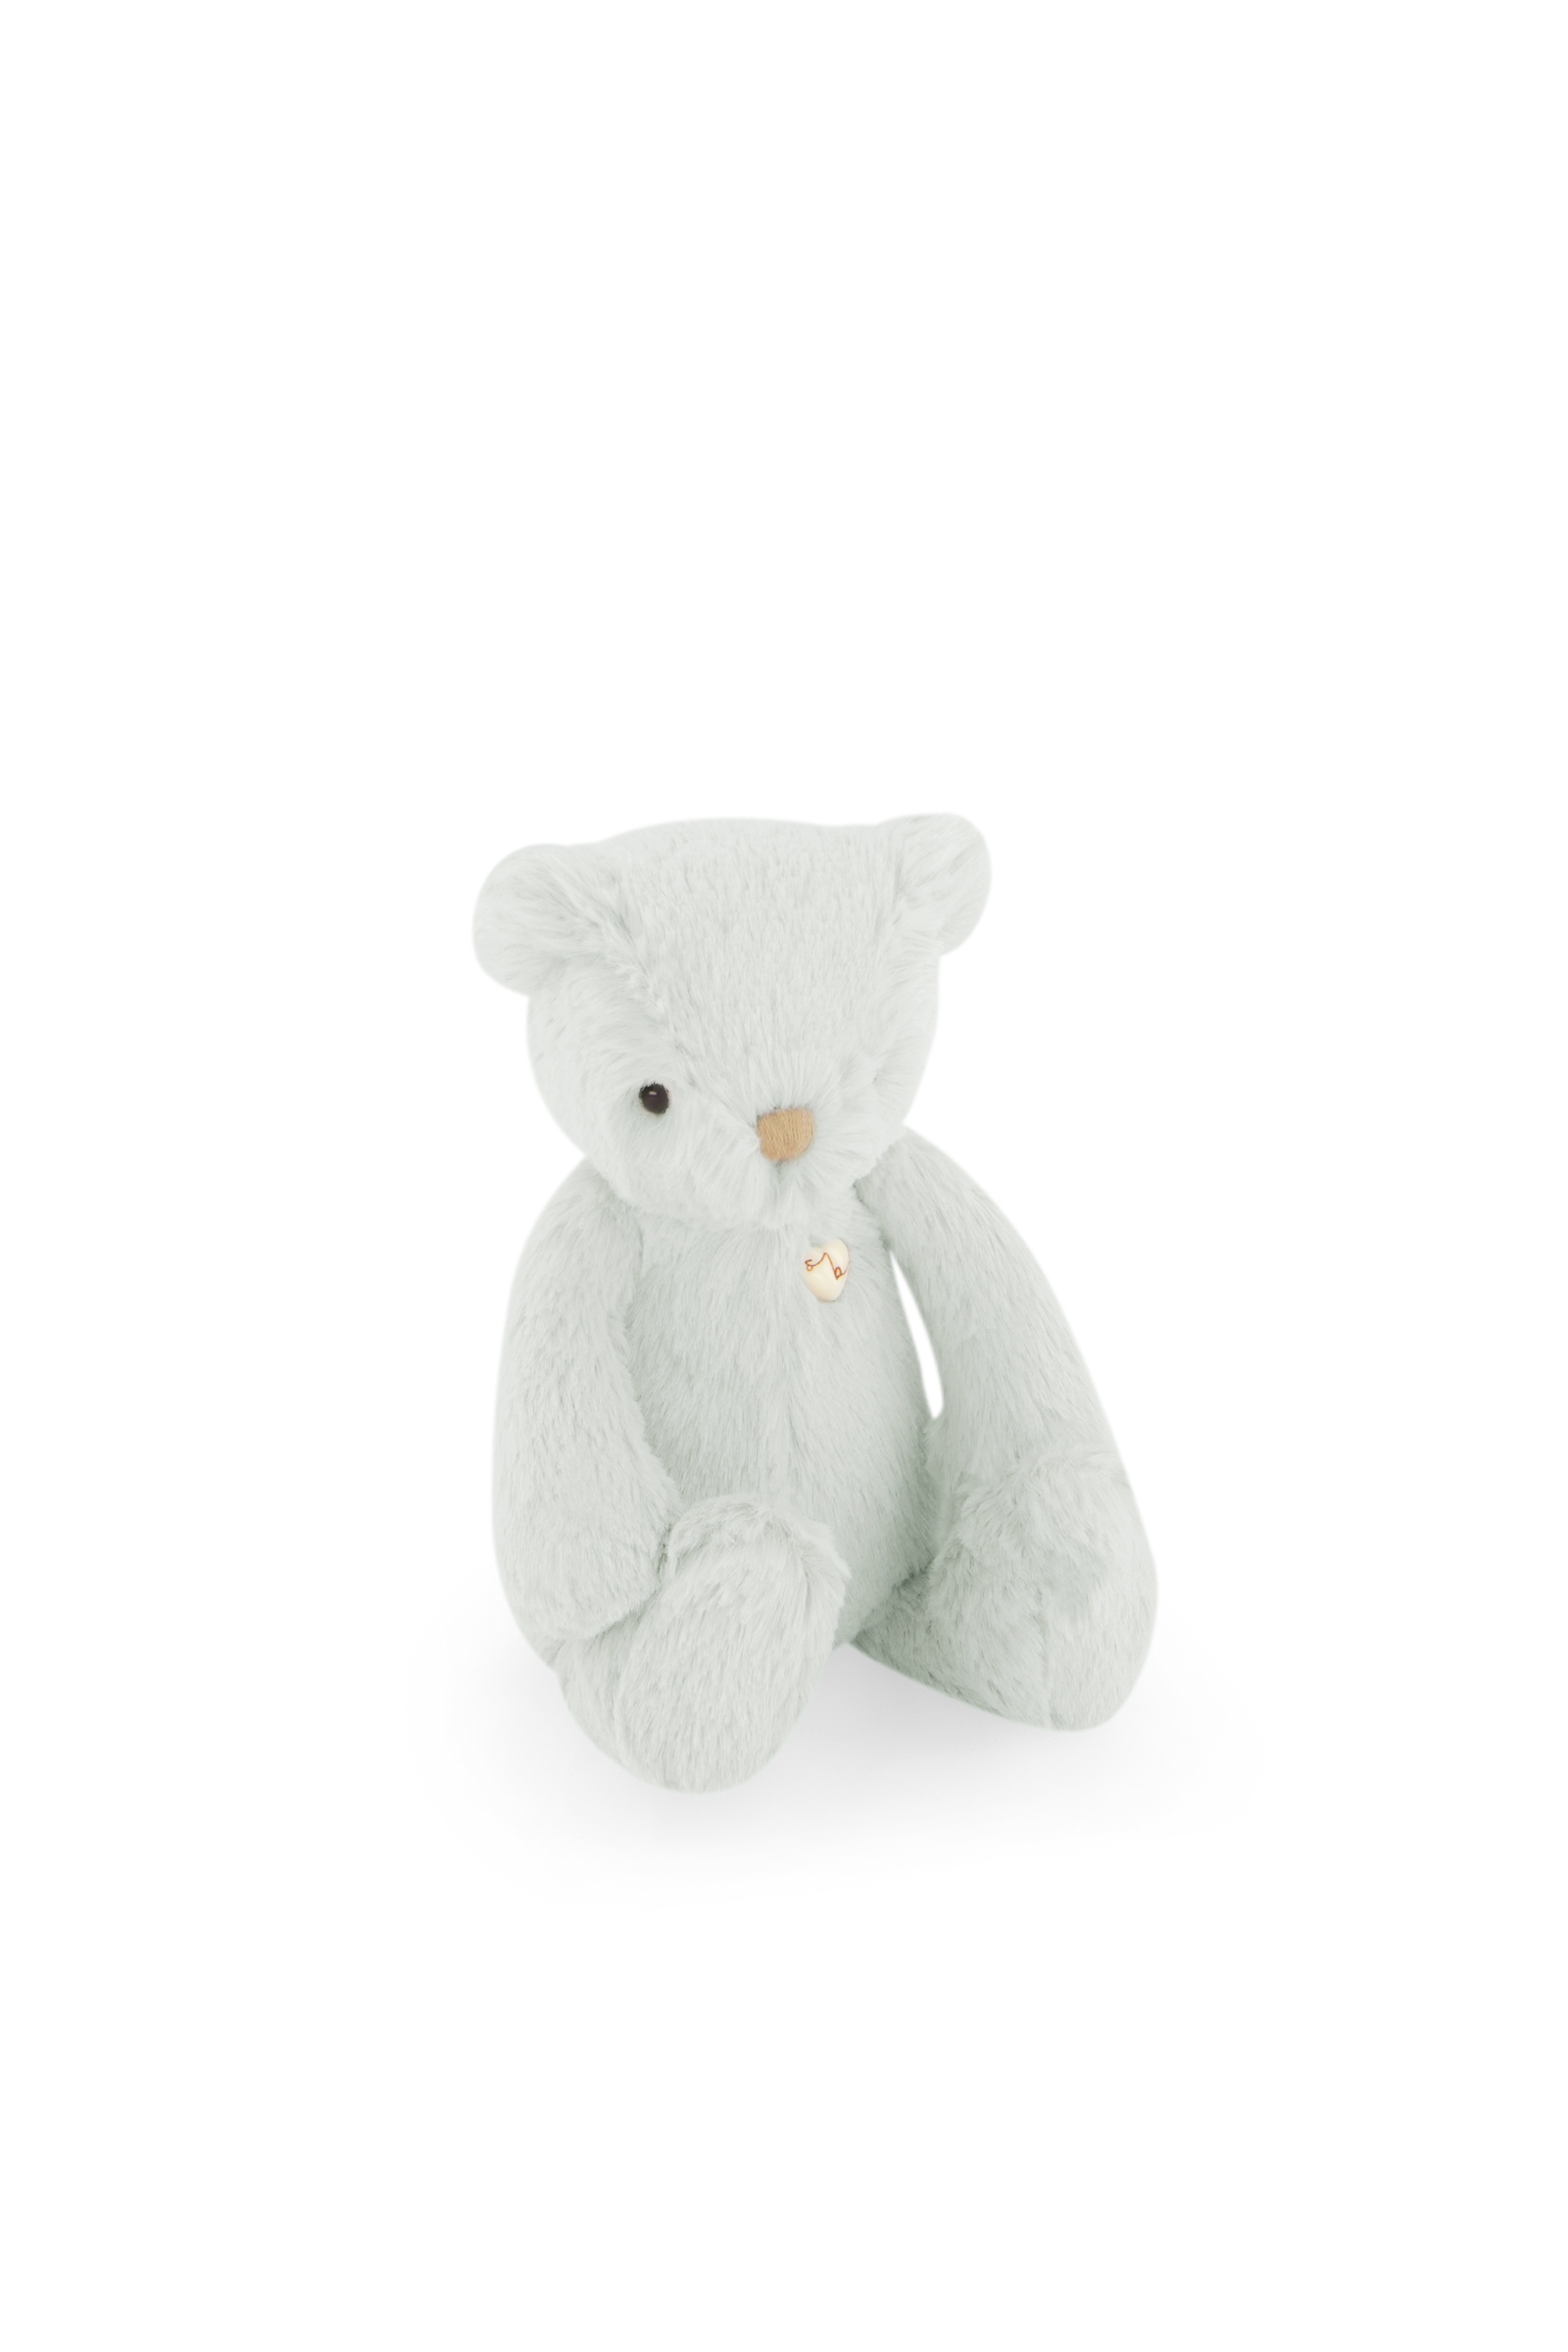 Snuggle Bunnies 20cm George The Bear - Willow Front_Side